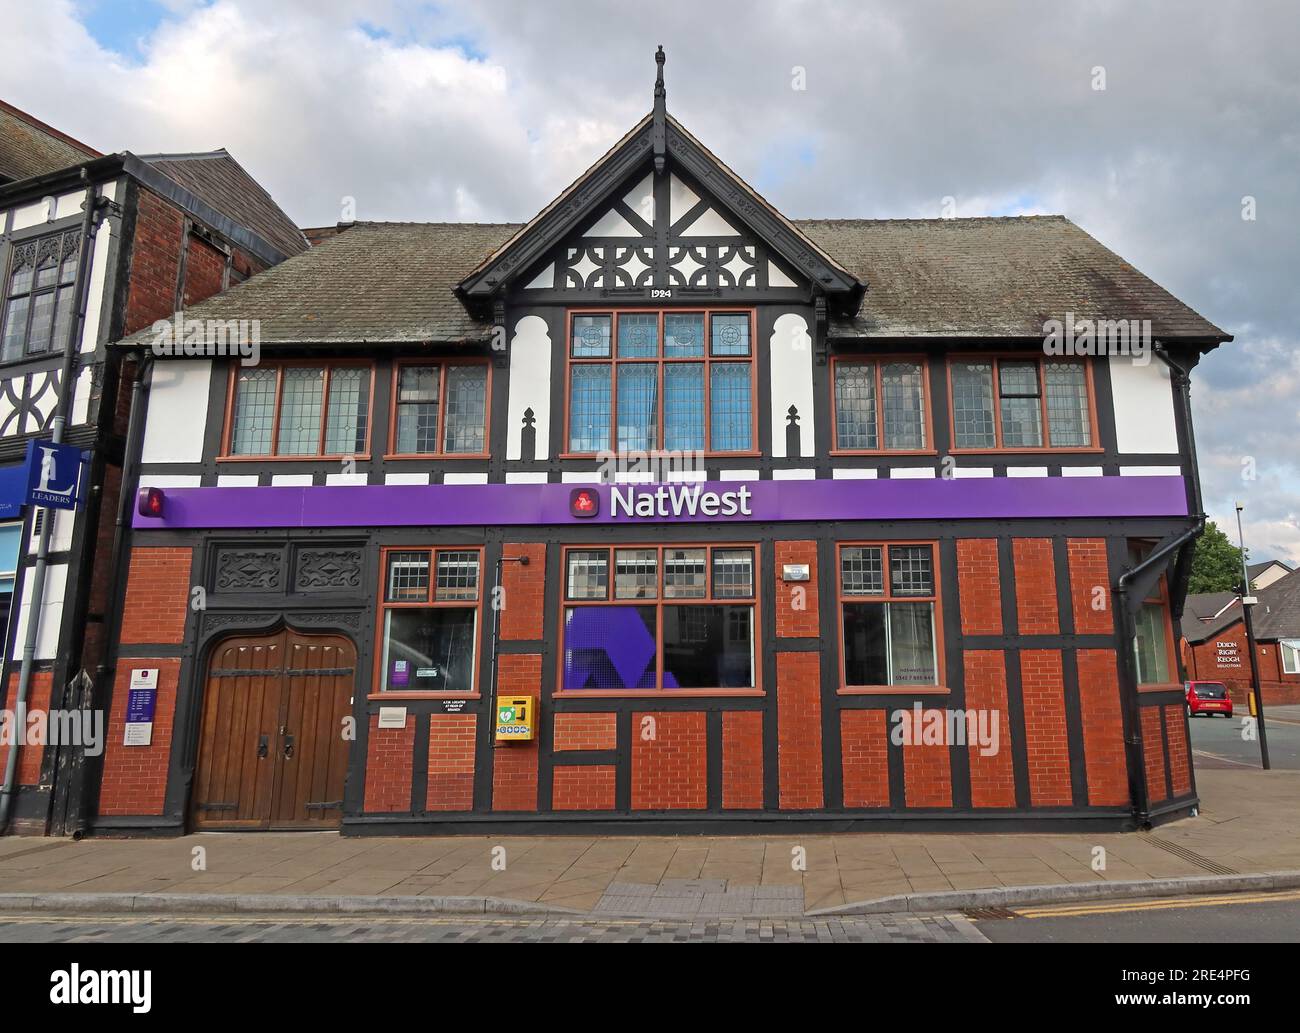 NatWest Bank, timber framed building in the The Bull Ring, Northwich, Cheshire, England, UK, CW9 5BN Stock Photo